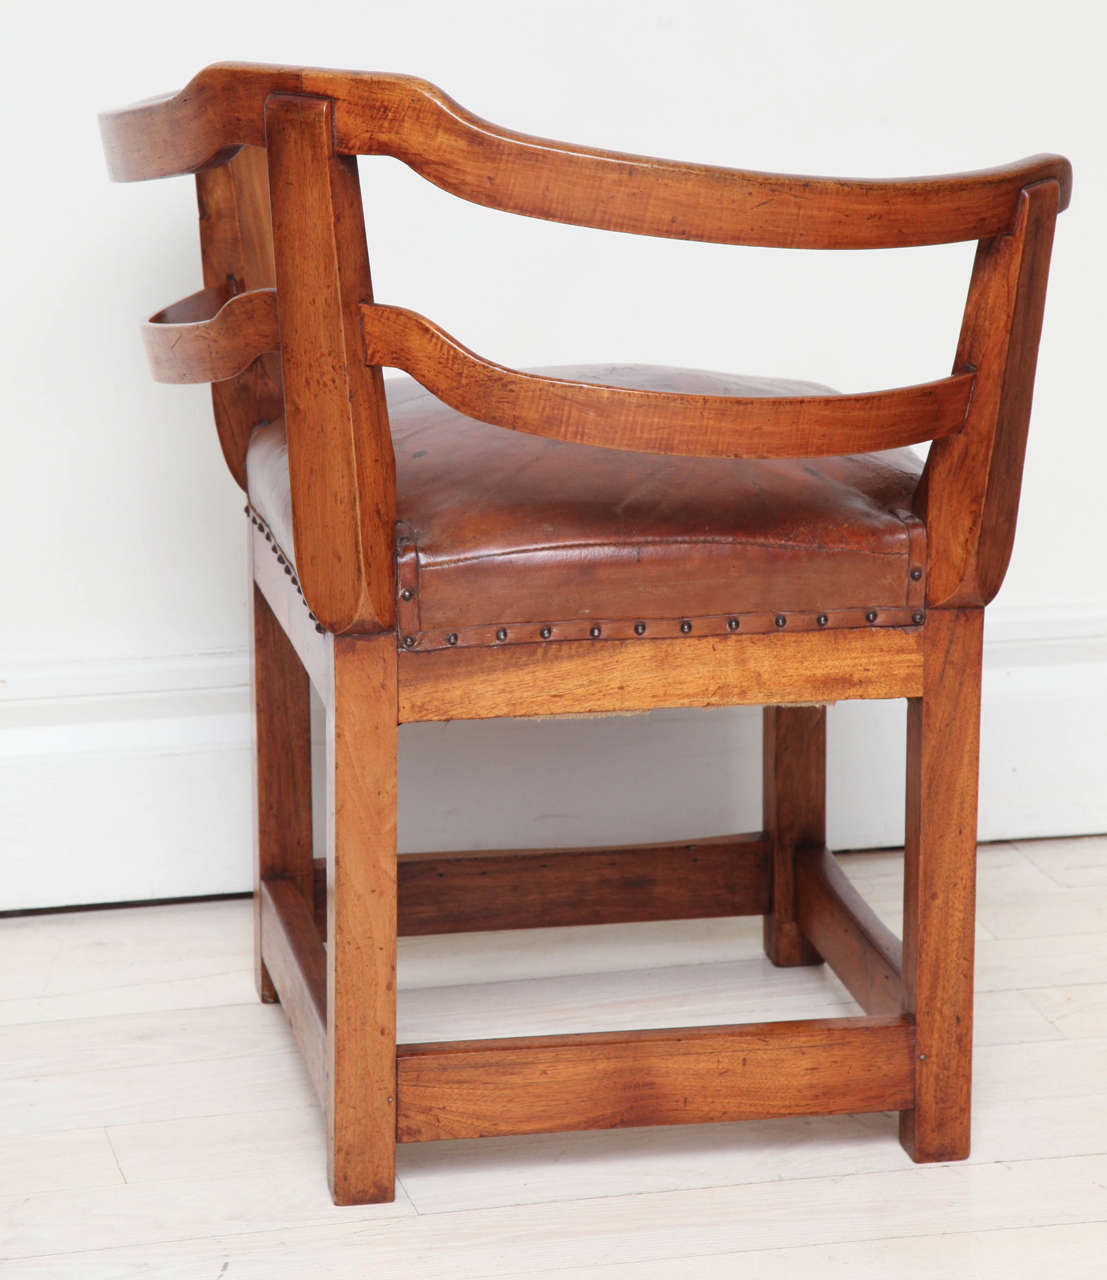 Early 19th Century French Walnut Corner Chair with Original Leather Seat 5